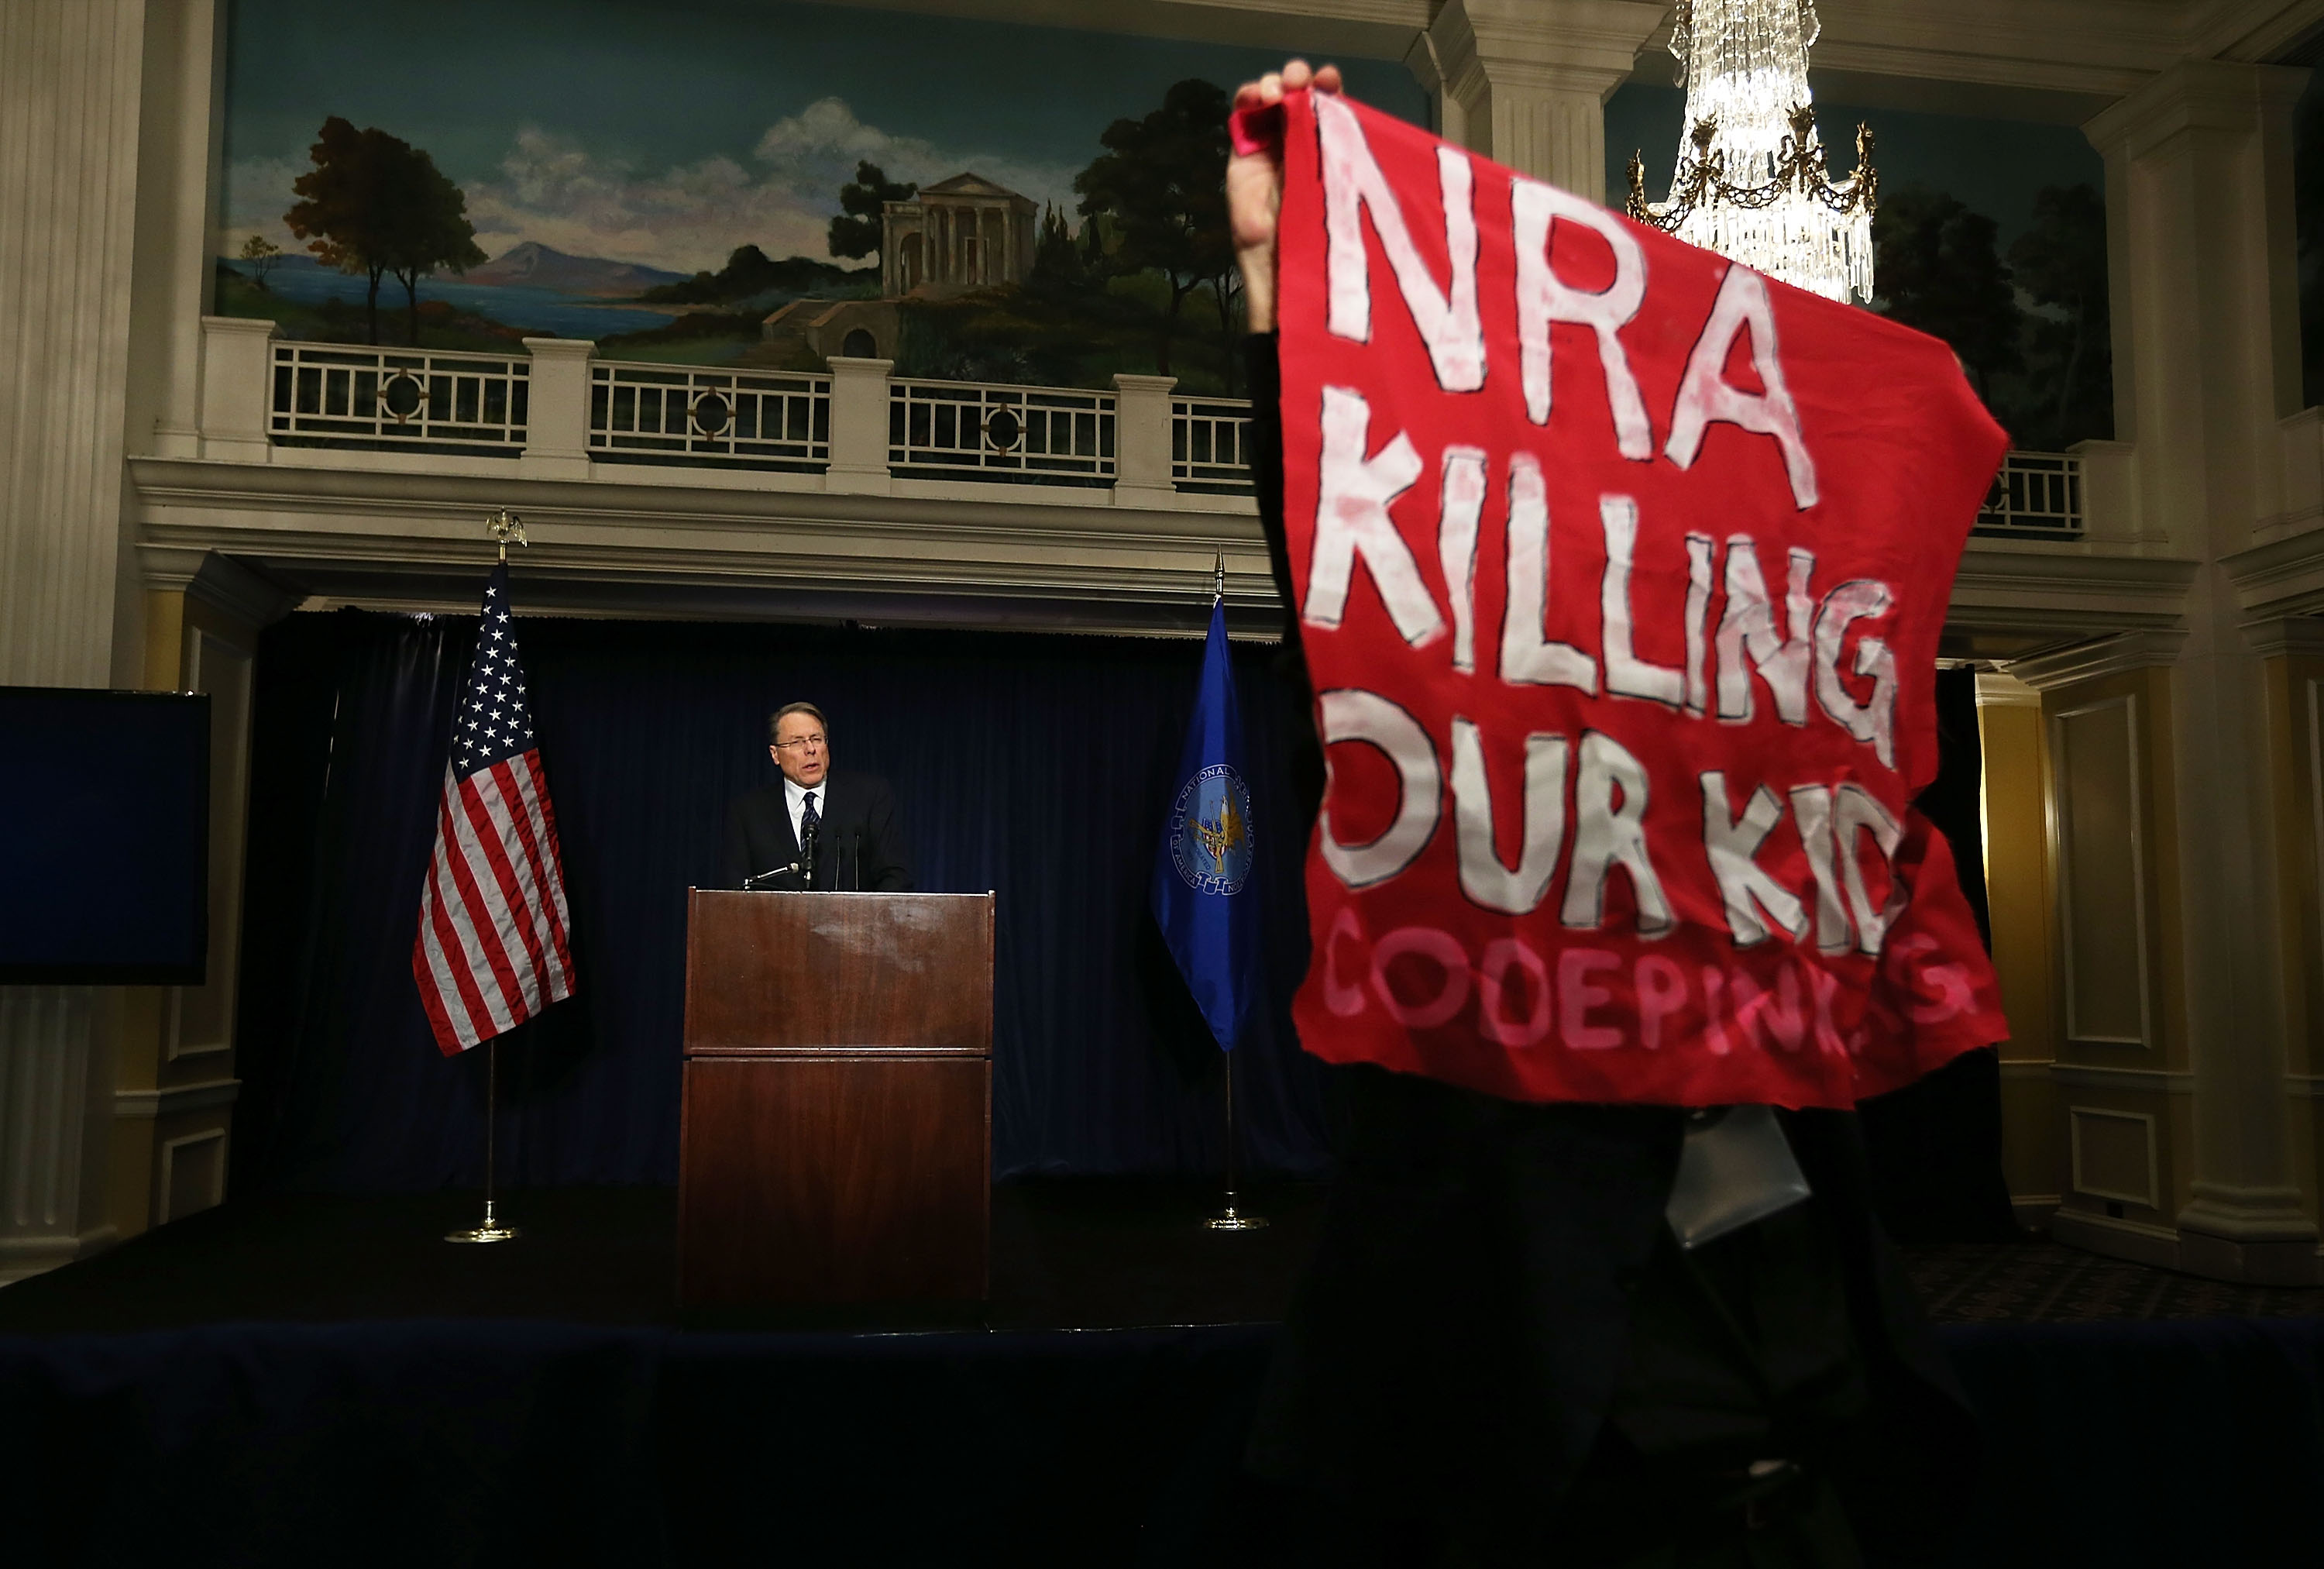 A protester holds up a bannaer as he protests during NRA CEO and Executive Vice President Wayne LaPierre's news conference at the Willard Hotel on December 21, 2012 in Washington, DC. (Photo by Alex Wong/Getty Images) 